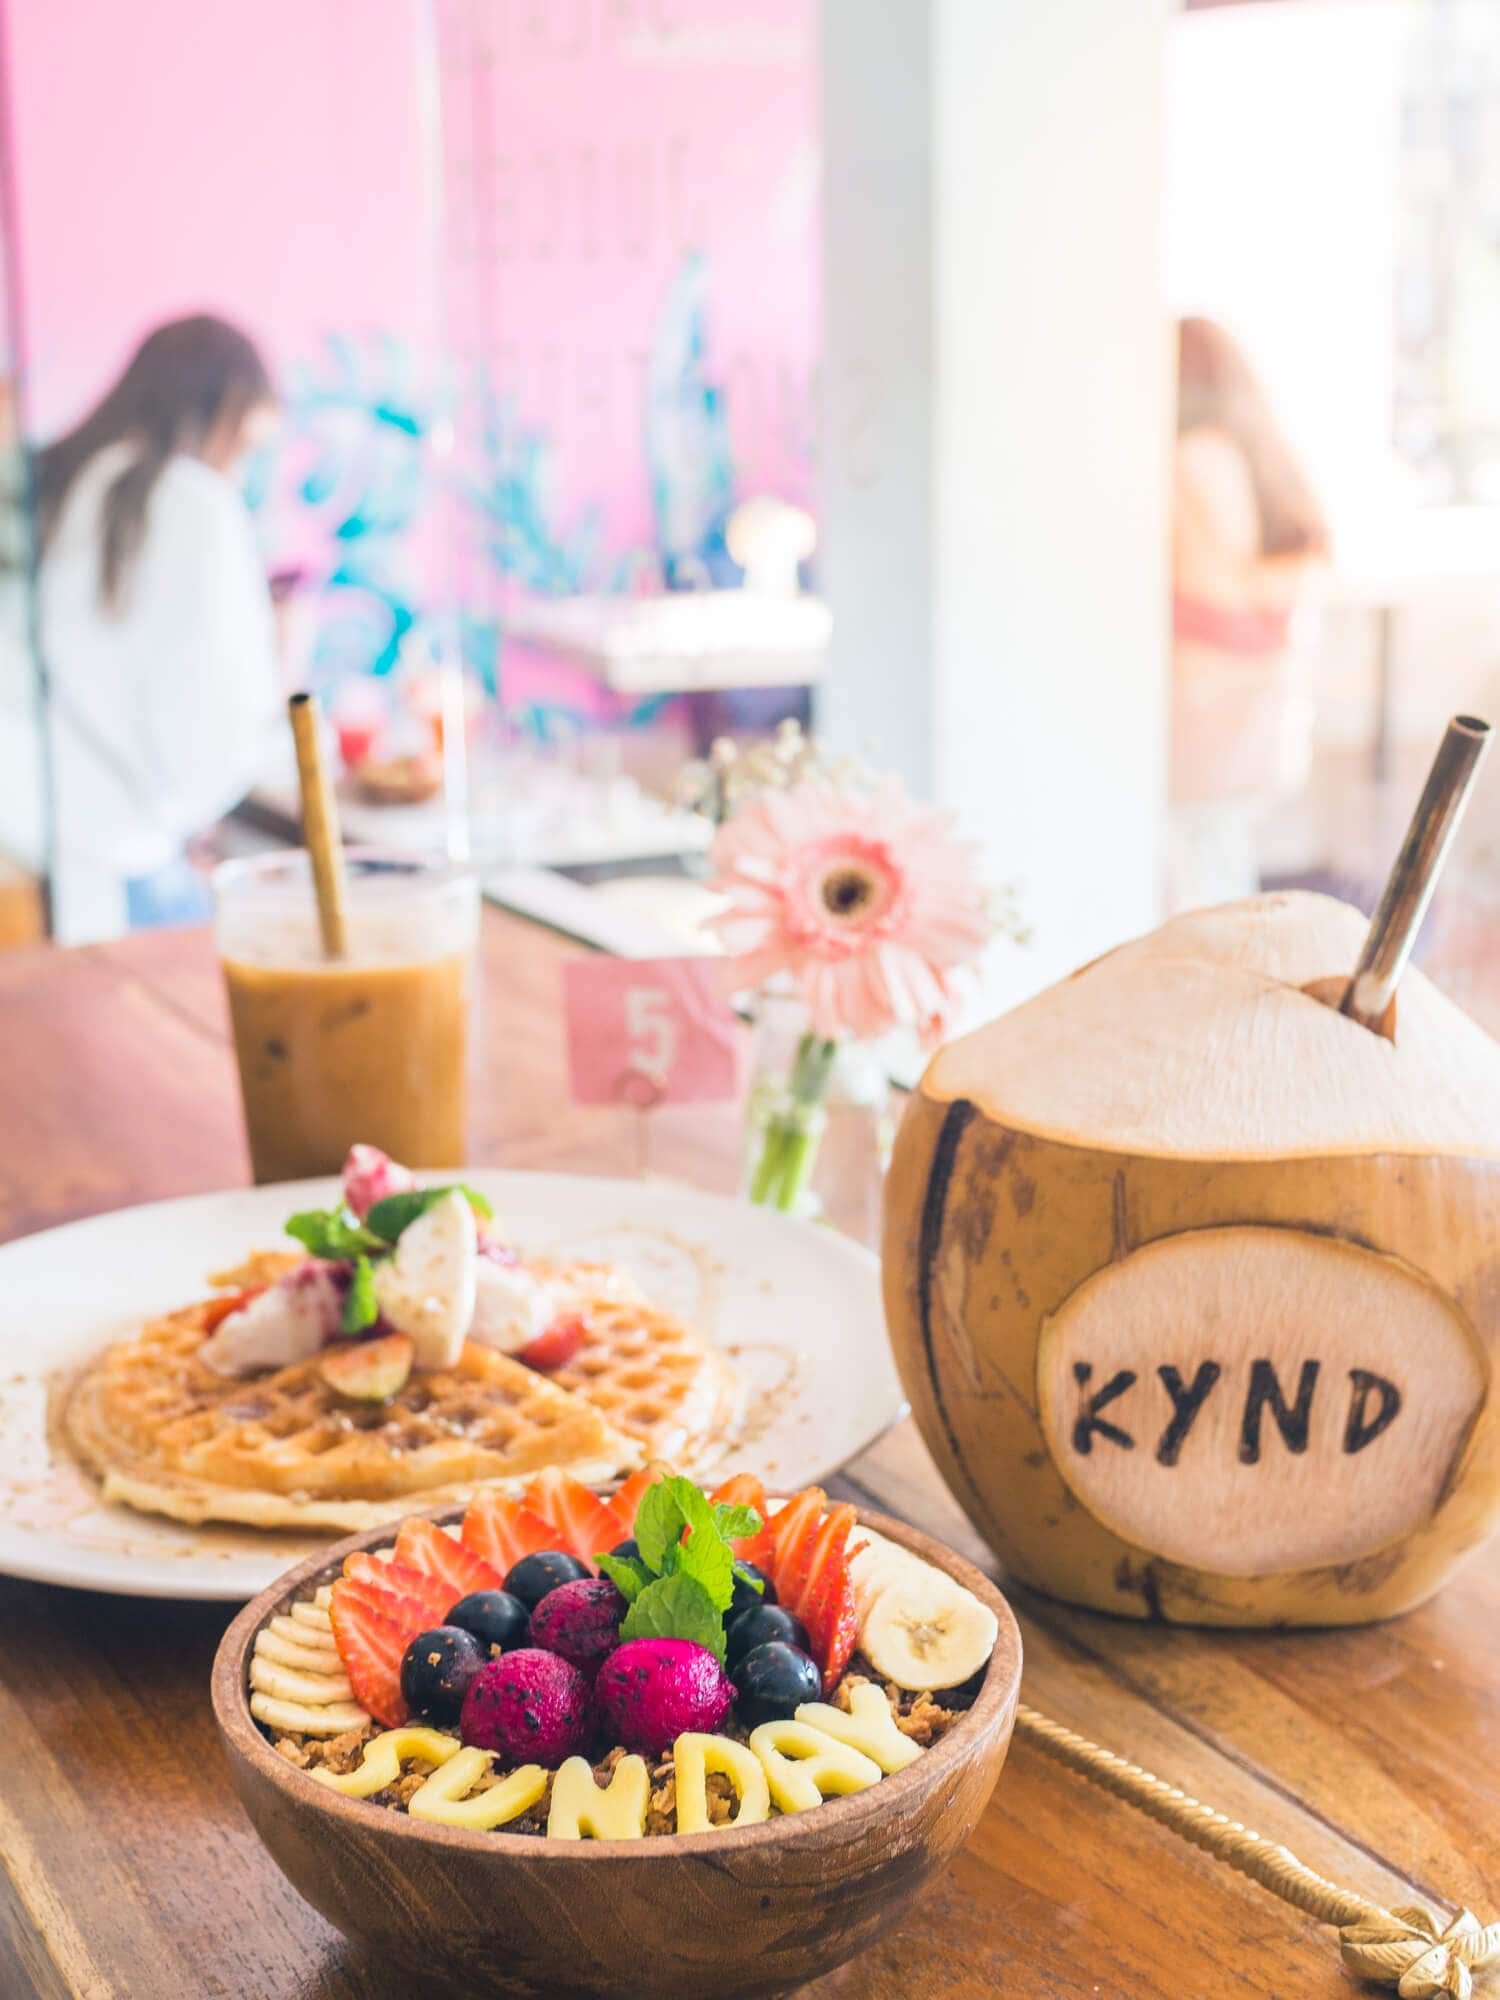 Kynd Community - One of the most Instagrammable cafés in Bali